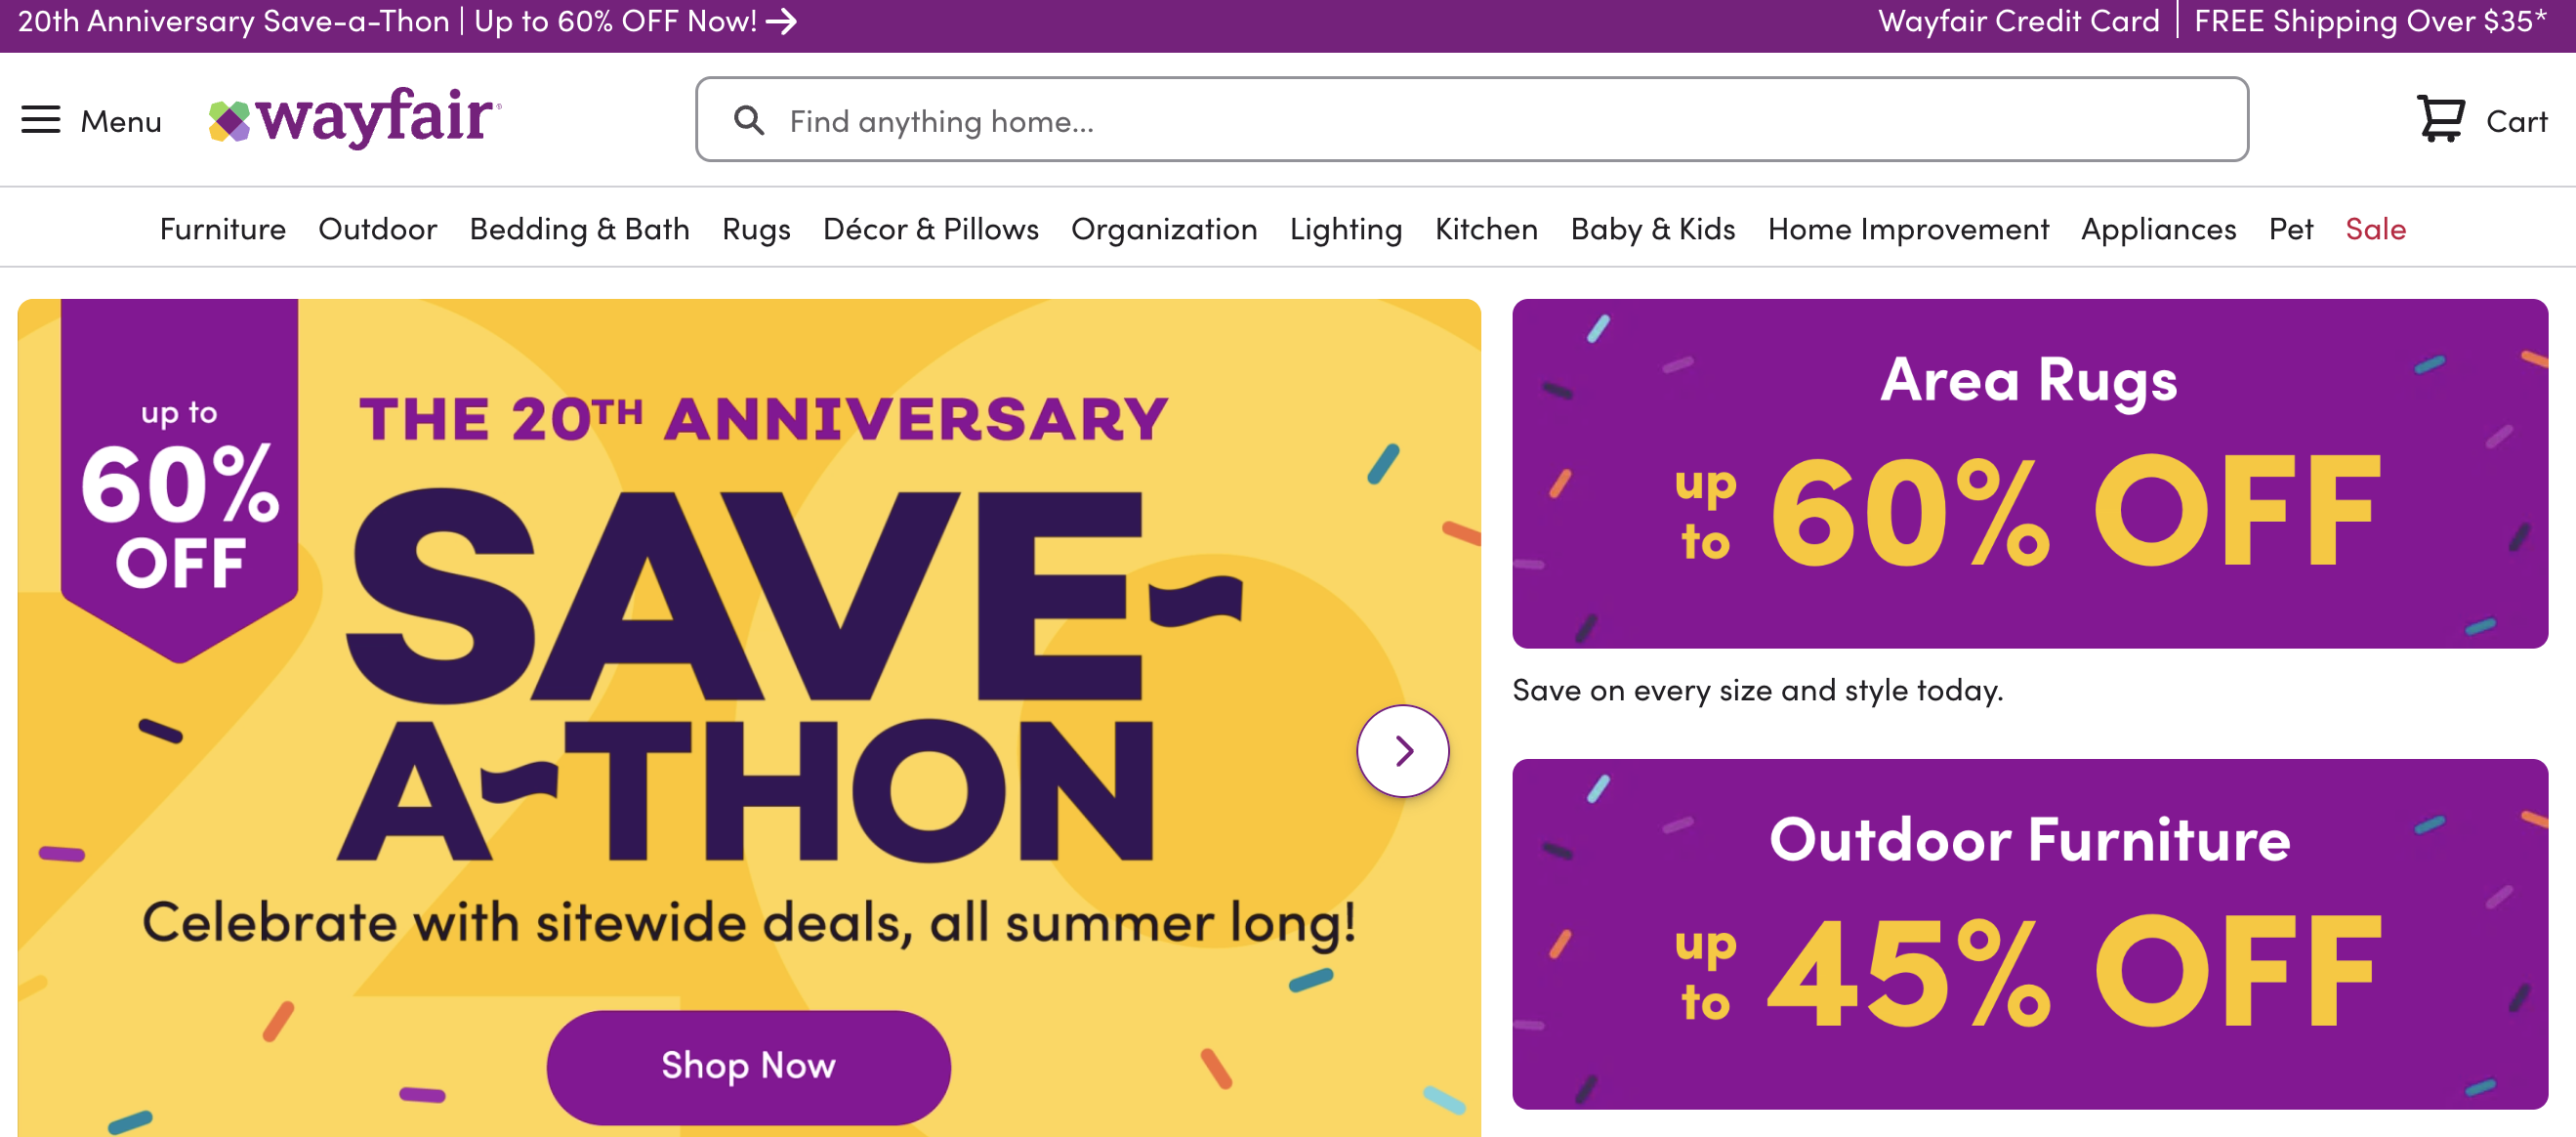 Wayfair How to Get the 10% Off Coupon Promo Code Working in 2023